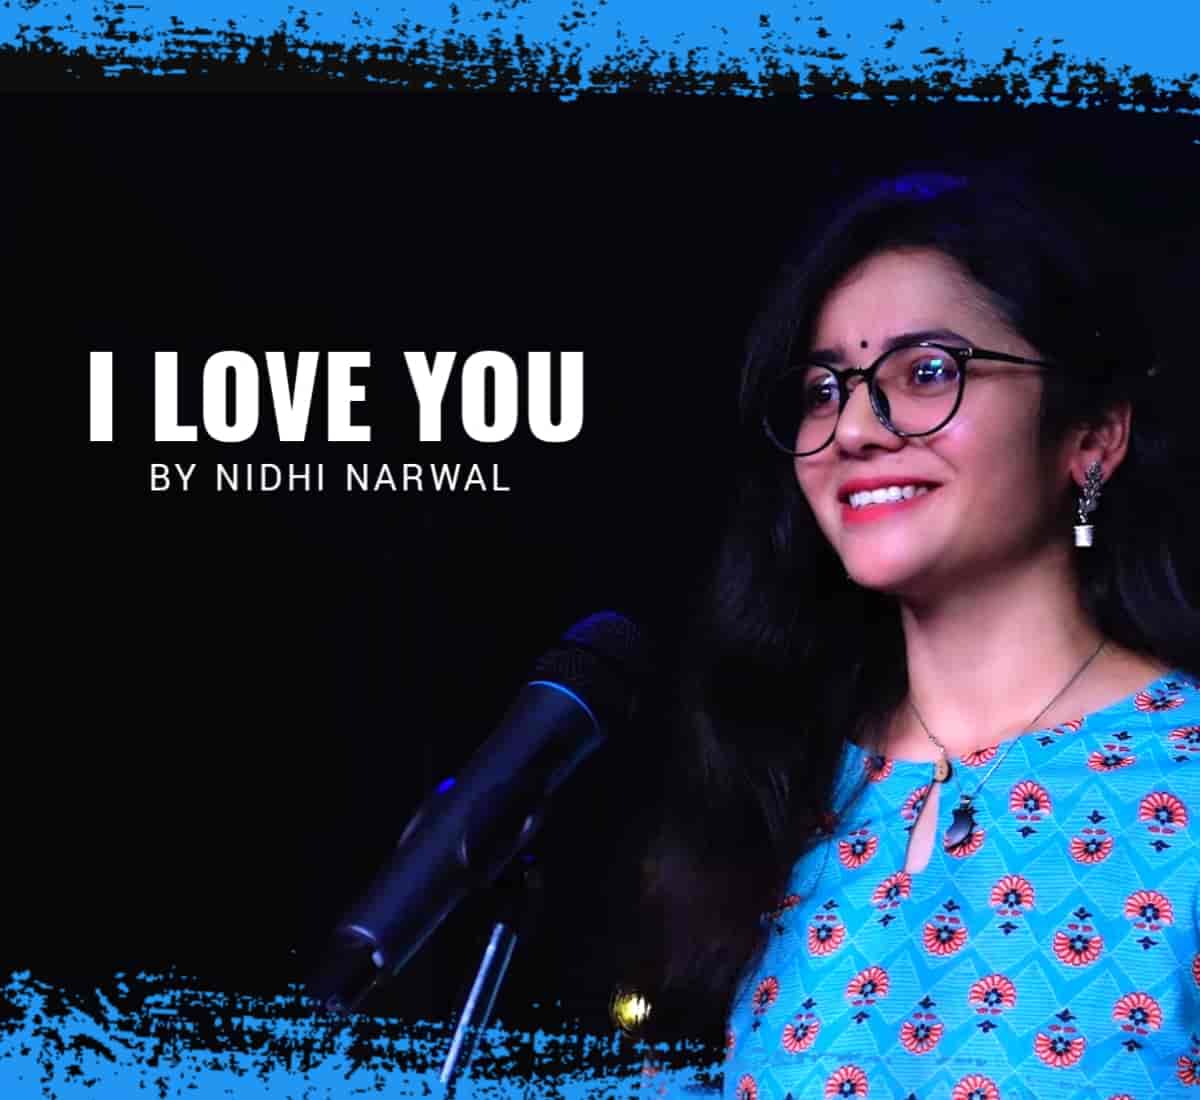 In this biggest festival of love, named Valentine's Day, on which the very talented young poetess Nidhi Narwal composes a lovely poem titled 'I Love You'